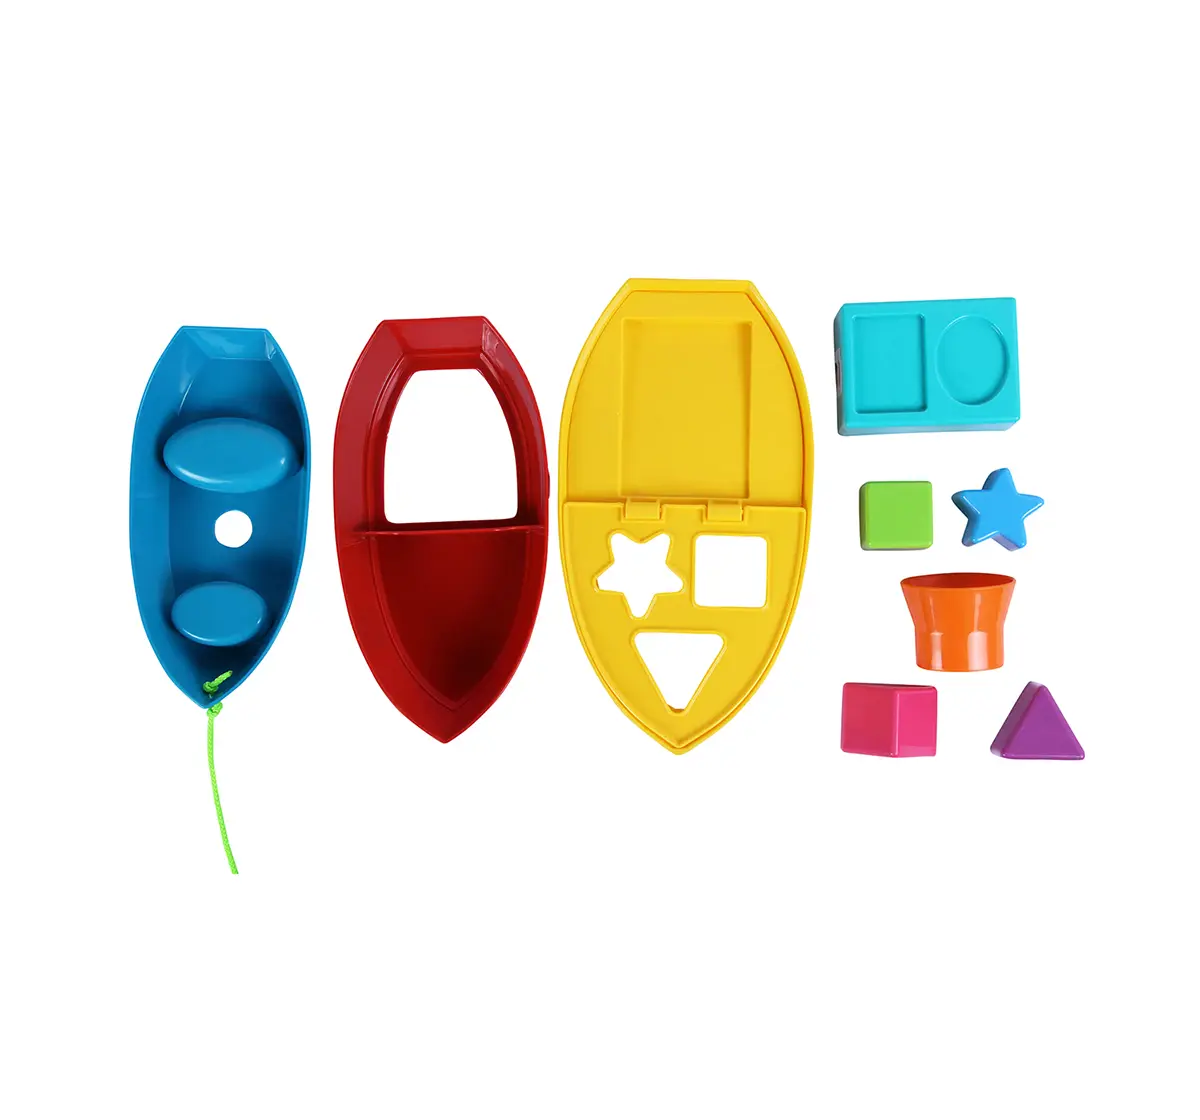 Giggles Stack A Boat, Multi Color Activity Toys for Kids age 12M+ 